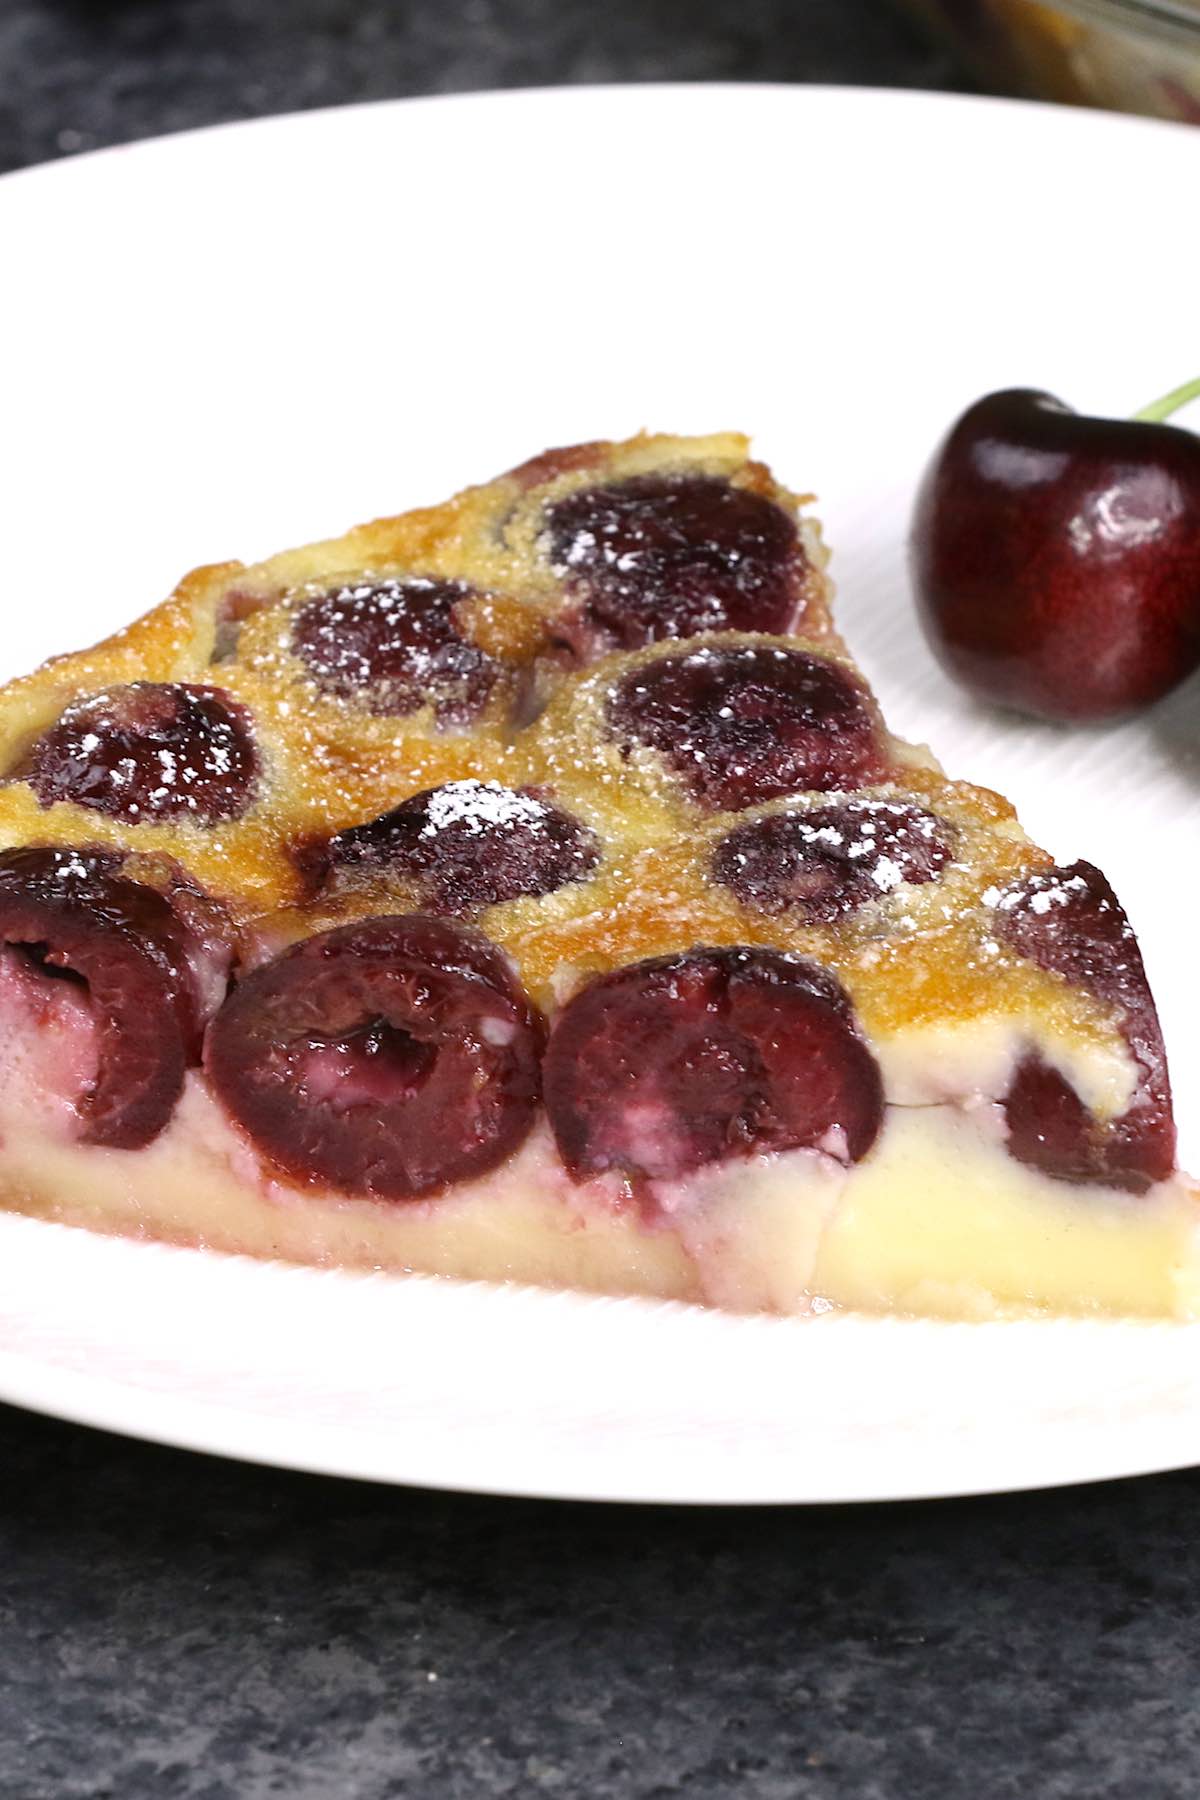 A wedge of clafoutis dusted with powdered sugar on a serving plate with a fresh cherry on the side